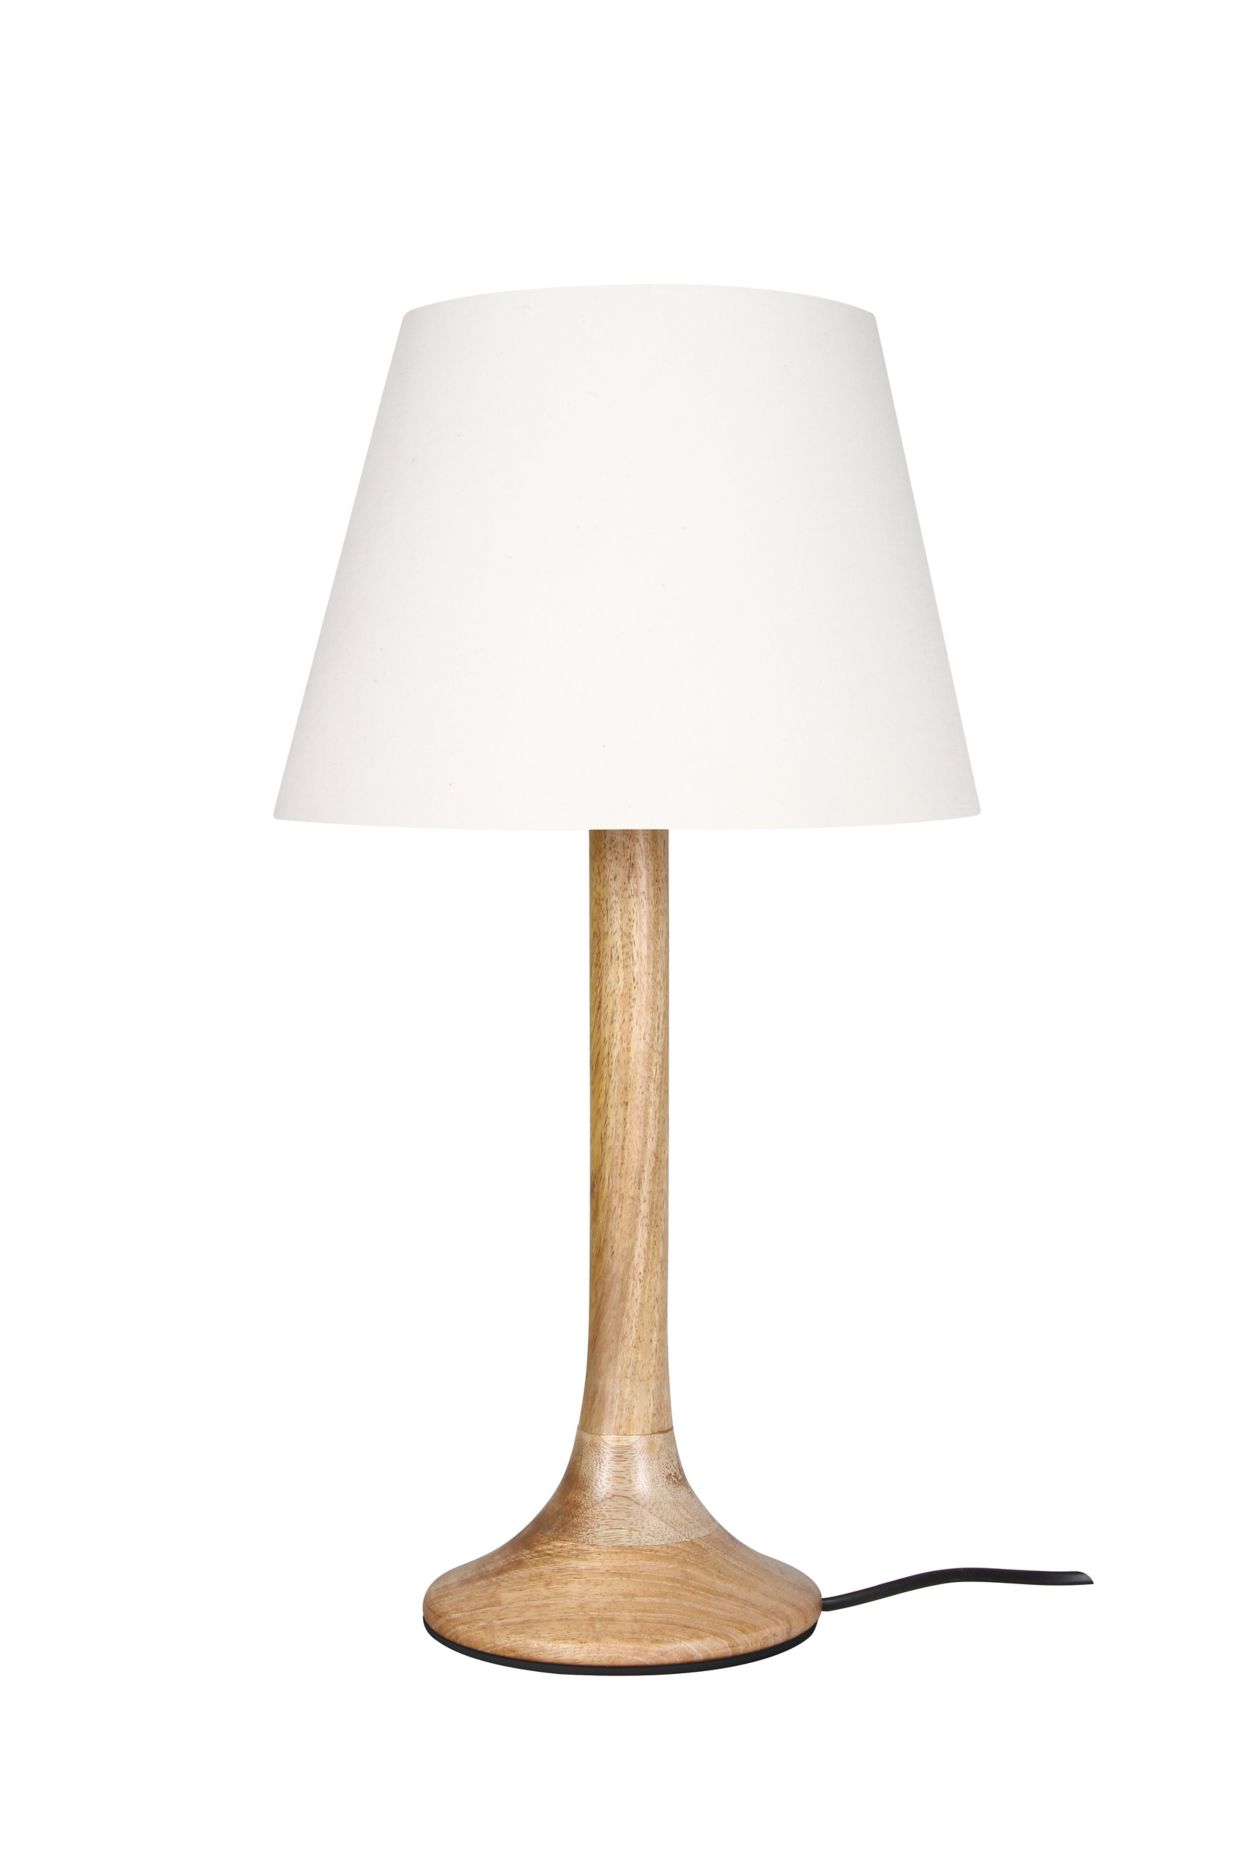 Good old-world charm of a classical wooden table lamp